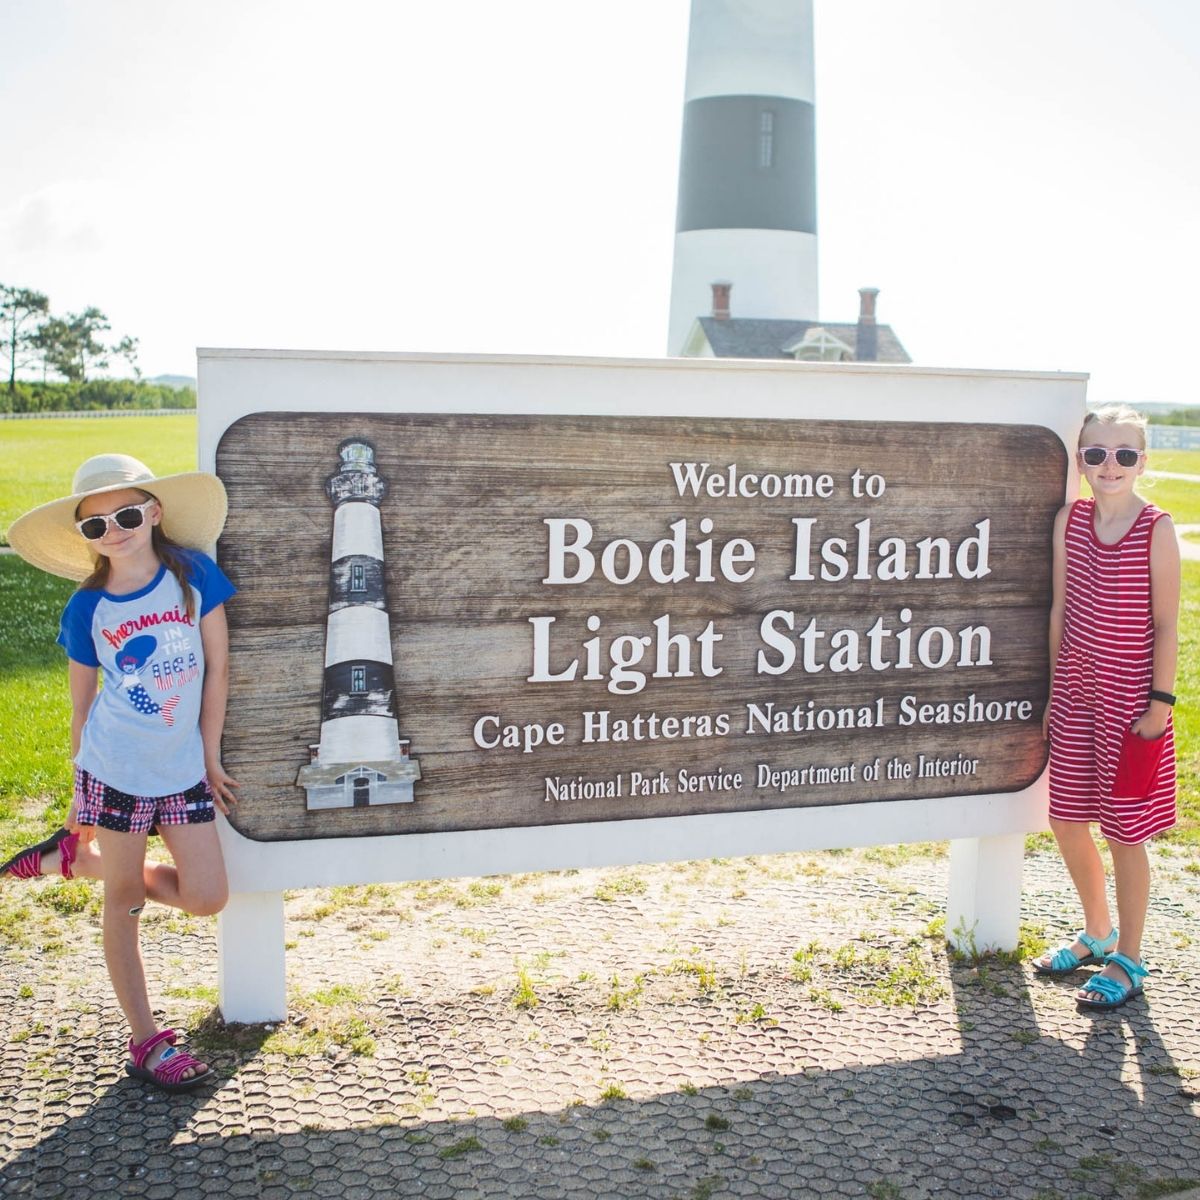 Two young girls stand by the welcome sign at the Bodie Island Light House.